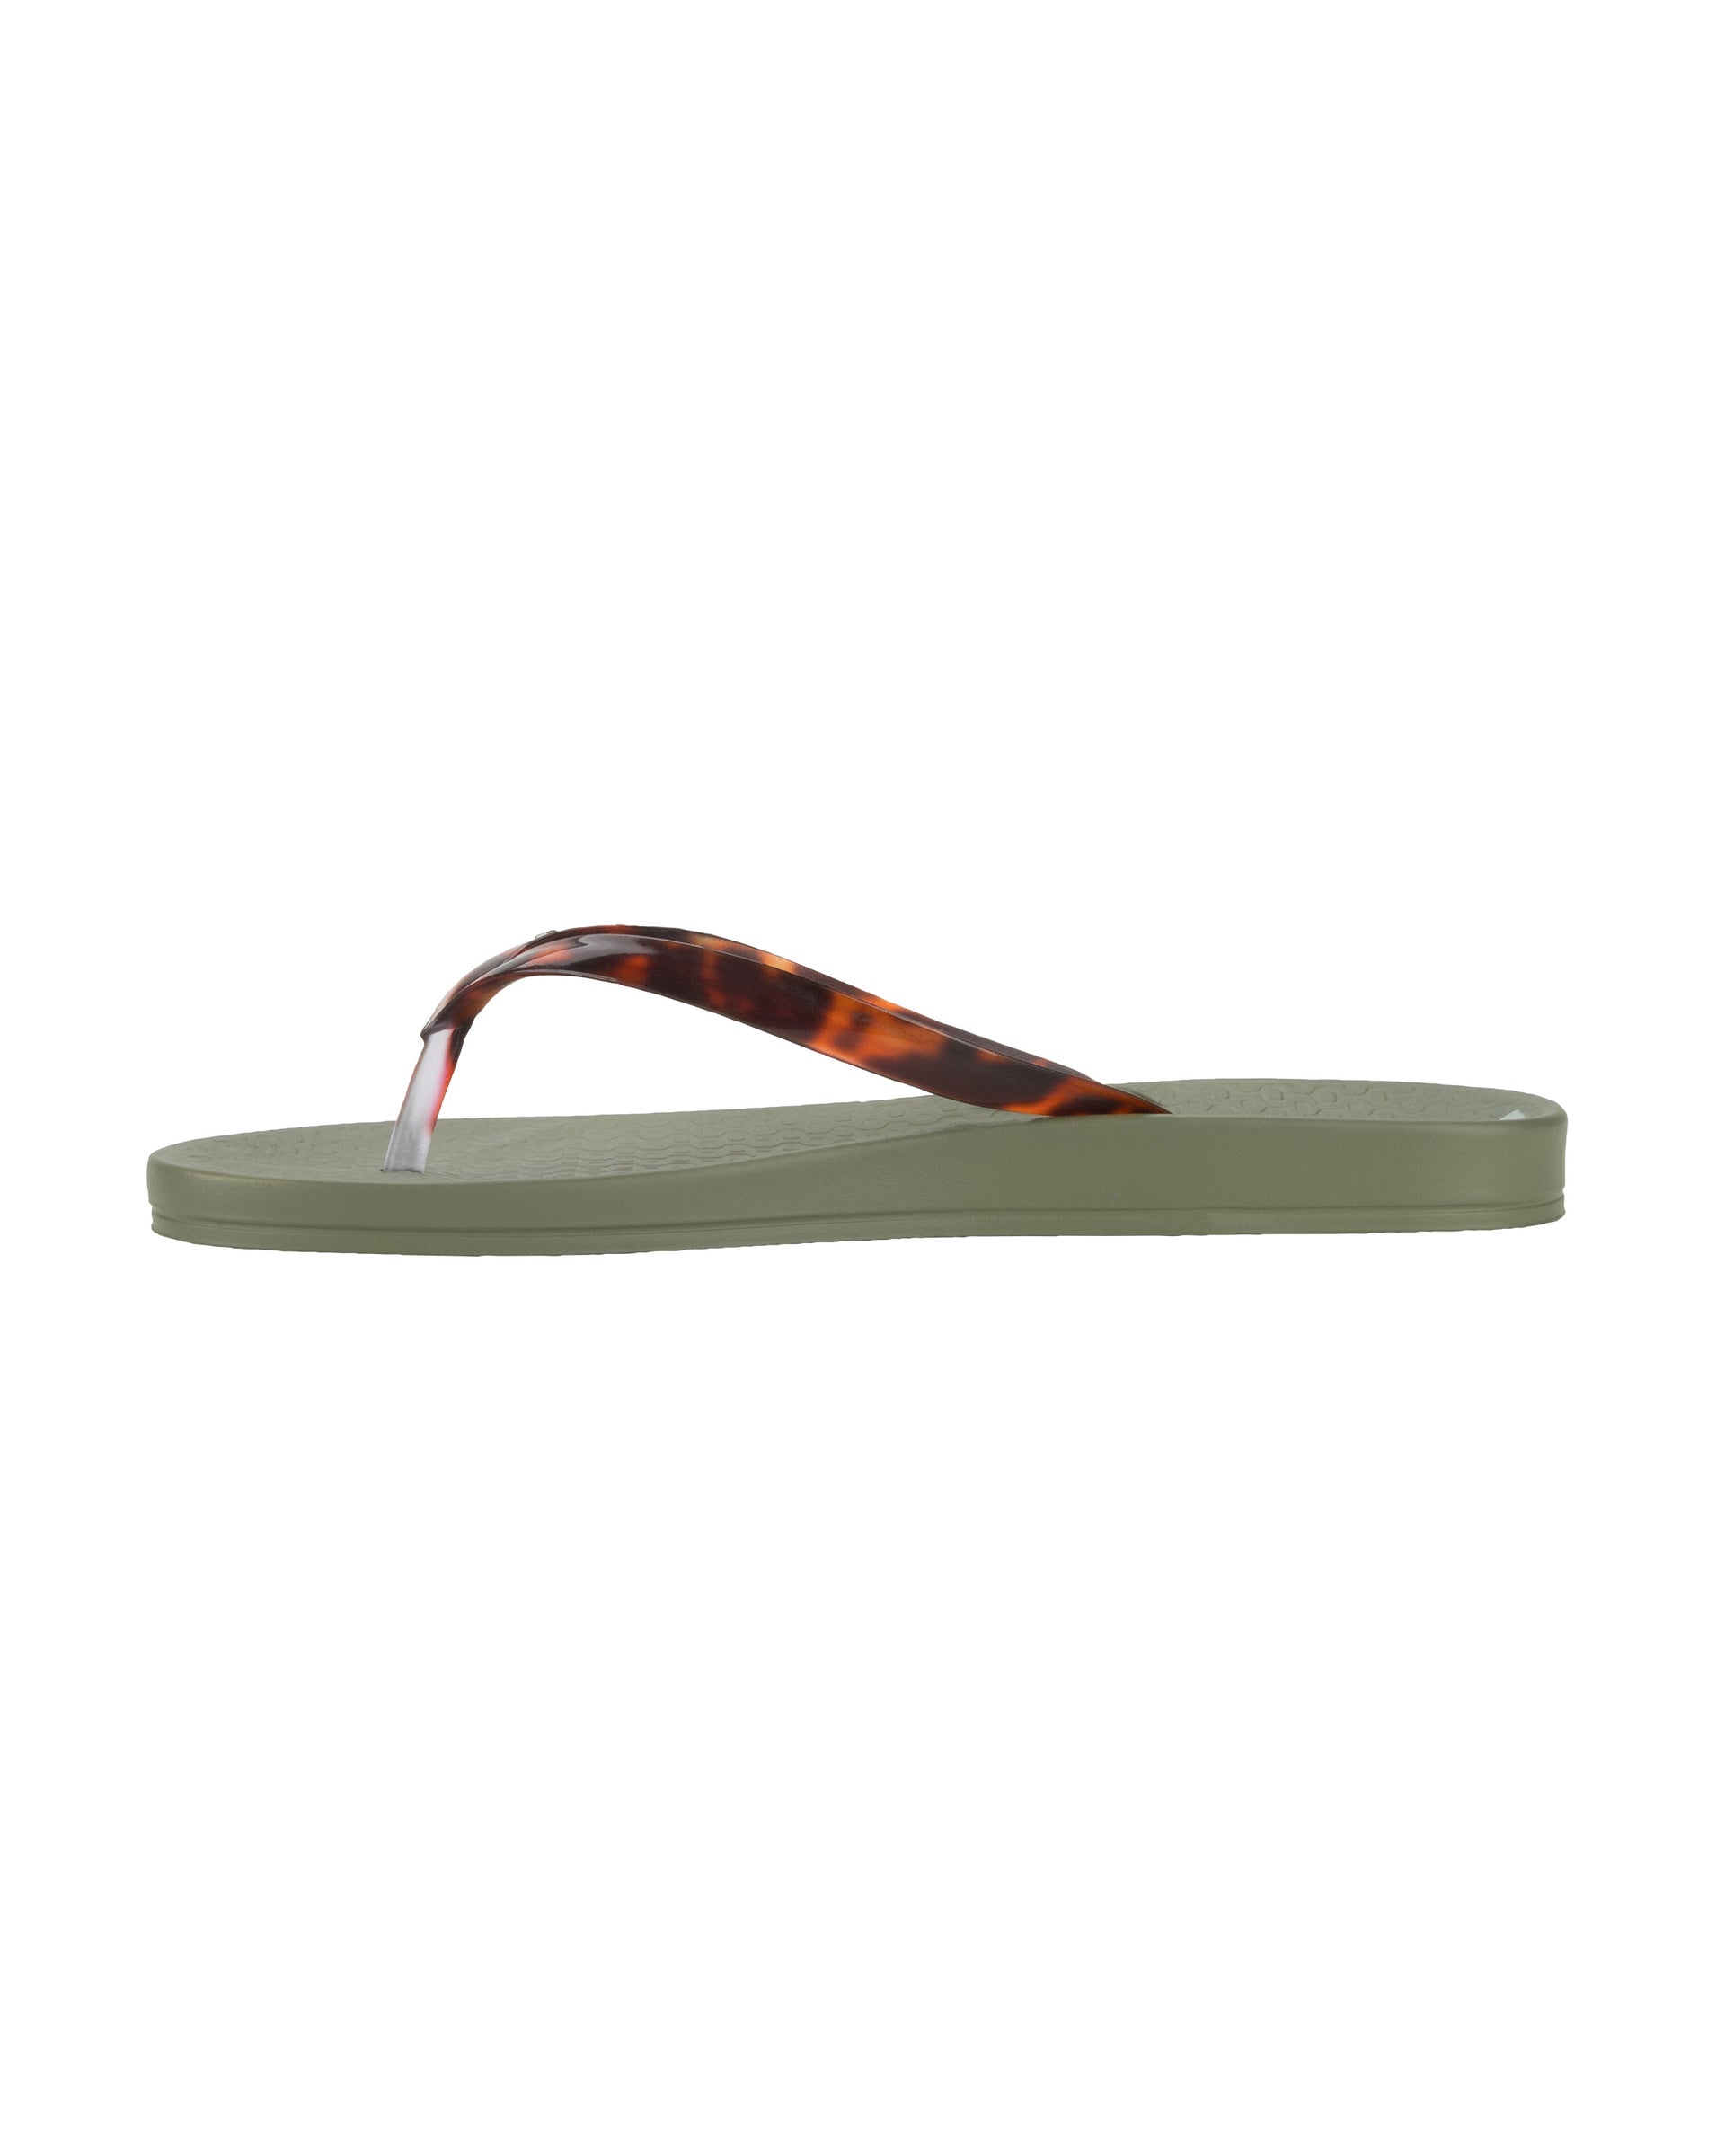 Inner side view of a green Ipanema Ana Connect women's flip flop with brown tortoiseshell  color strap.